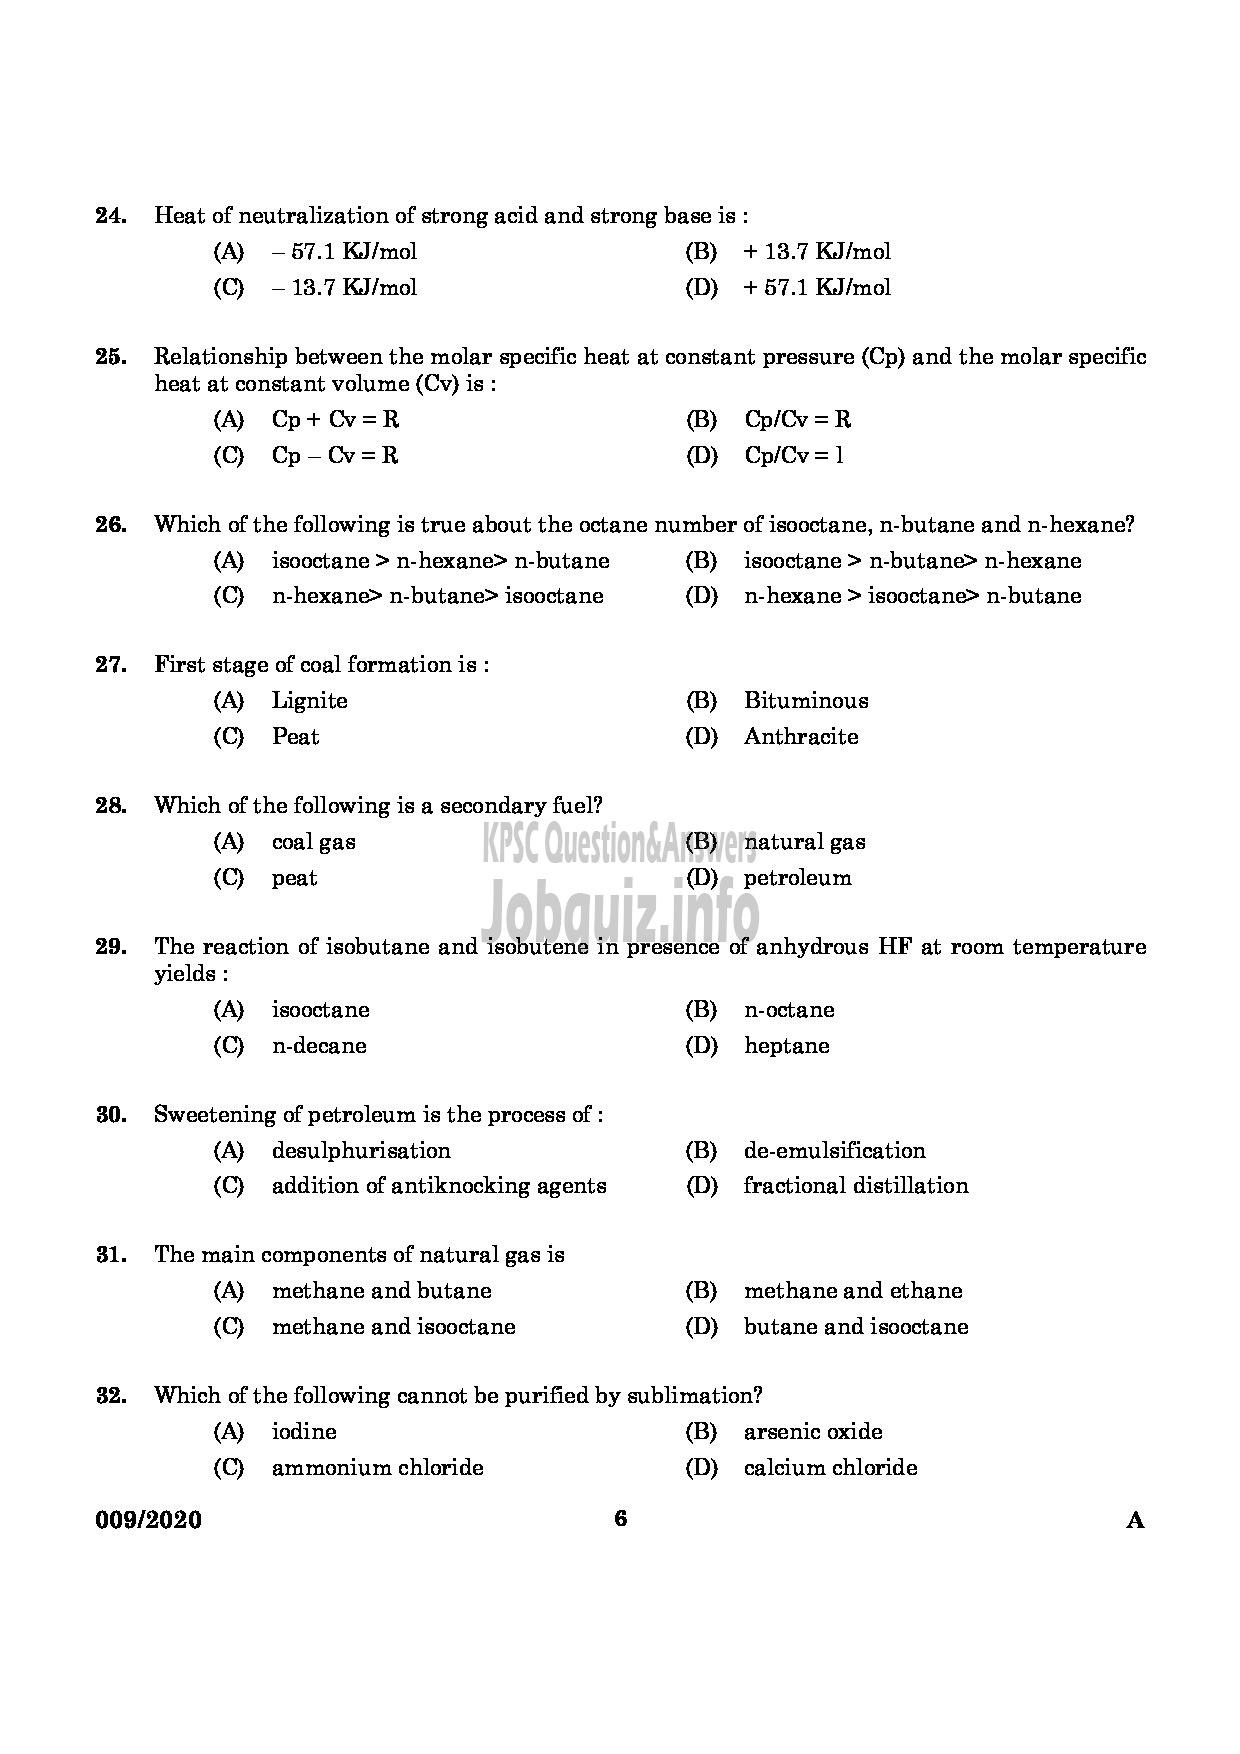 Kerala PSC Question Paper - CHEMIST IN FACTORIES AND BOILERS ENGLISH -4